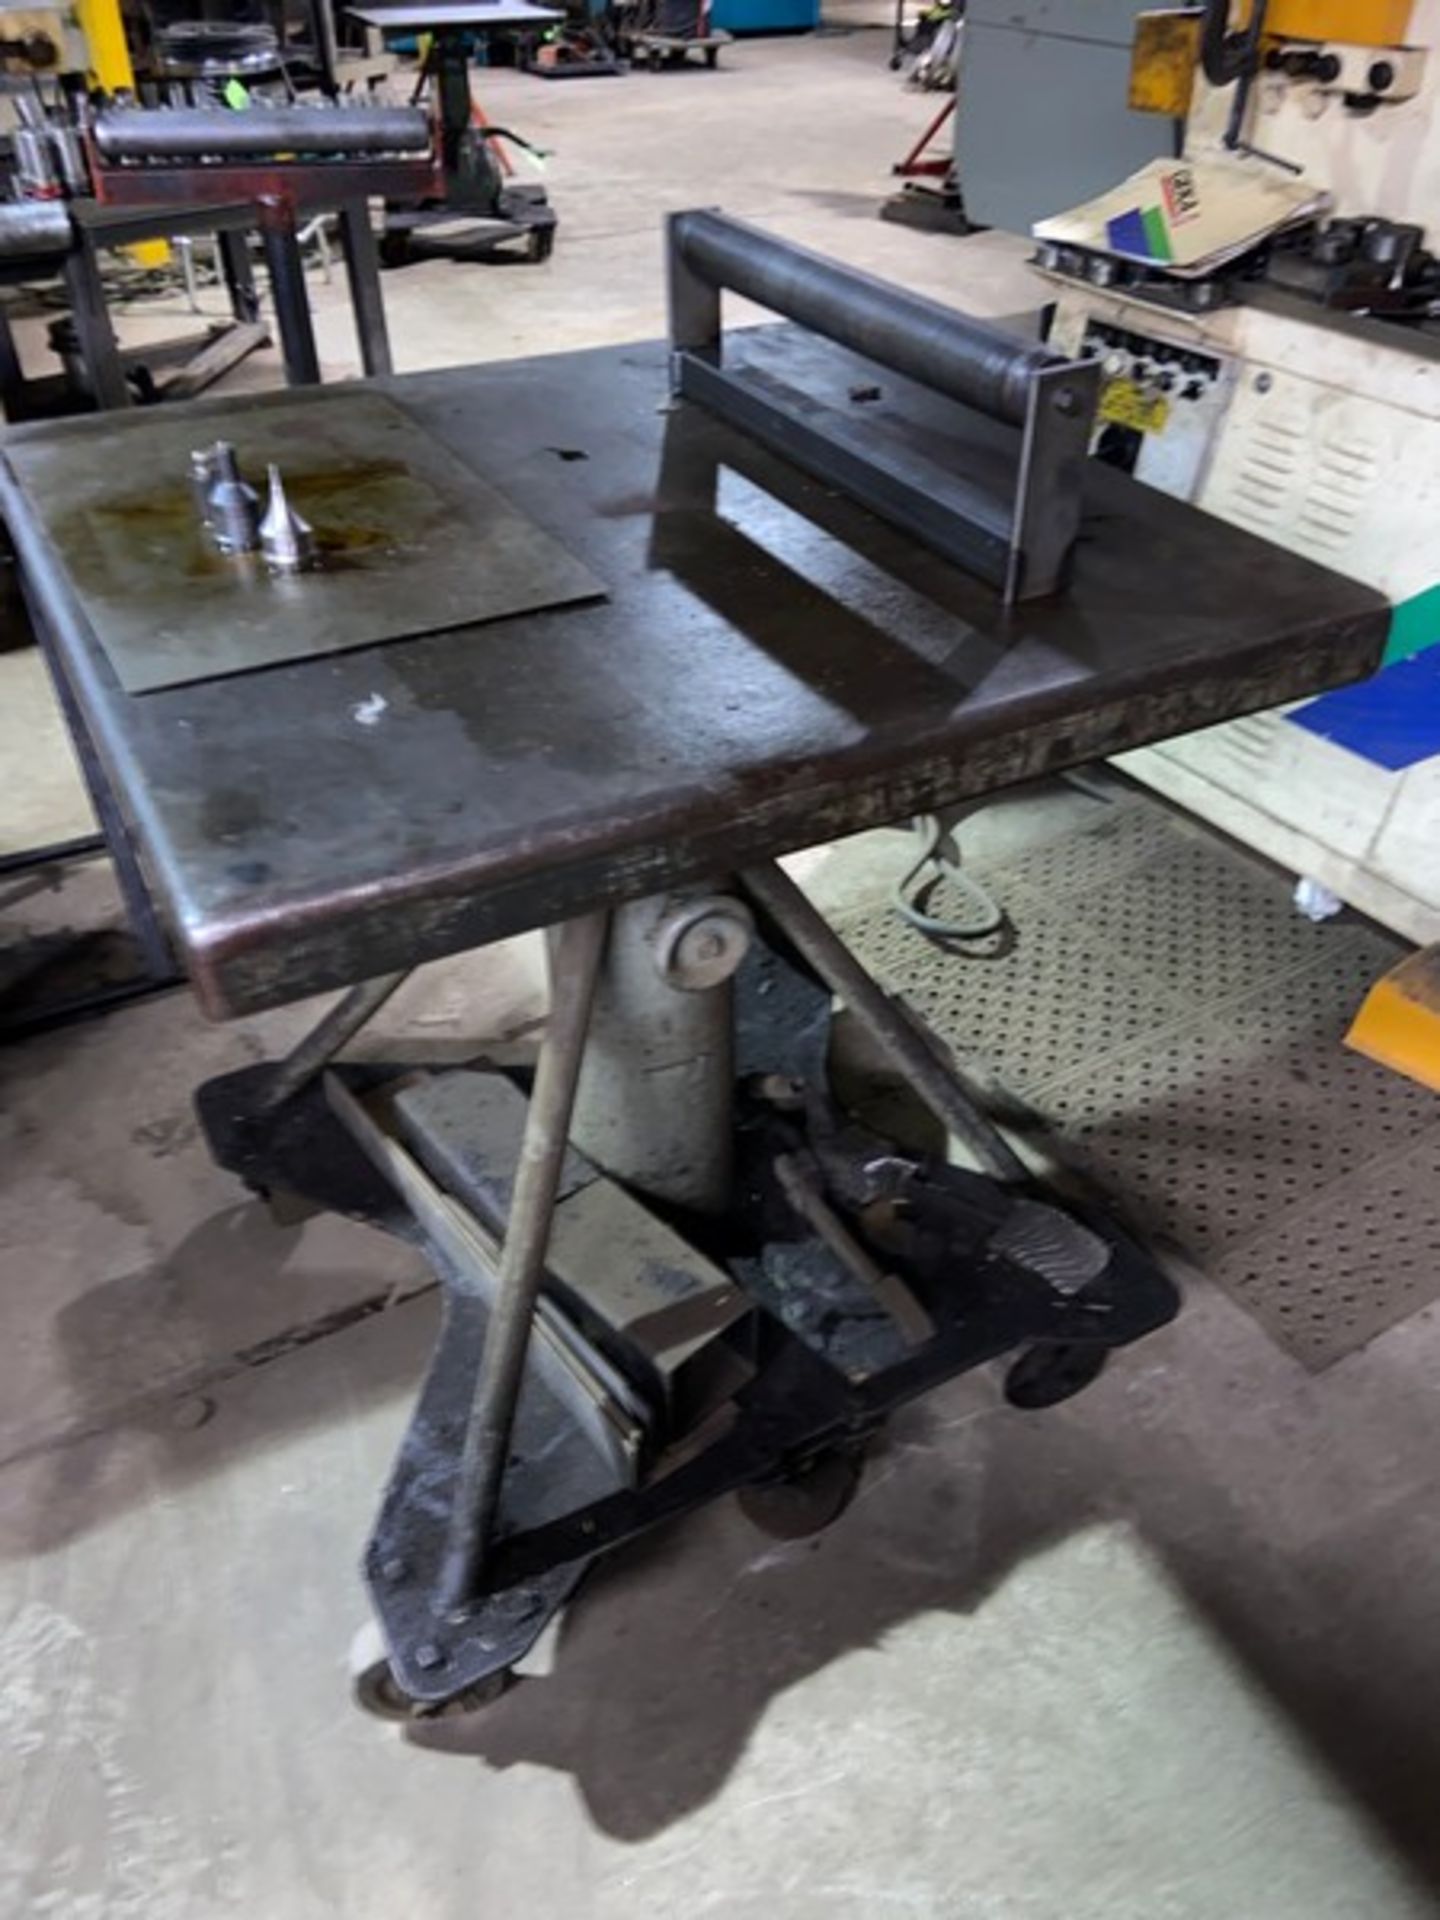 Portable Adjustable Shop Table, Mounted on Portable Frame (LOCATED IN CORRY, PA) - Image 3 of 3